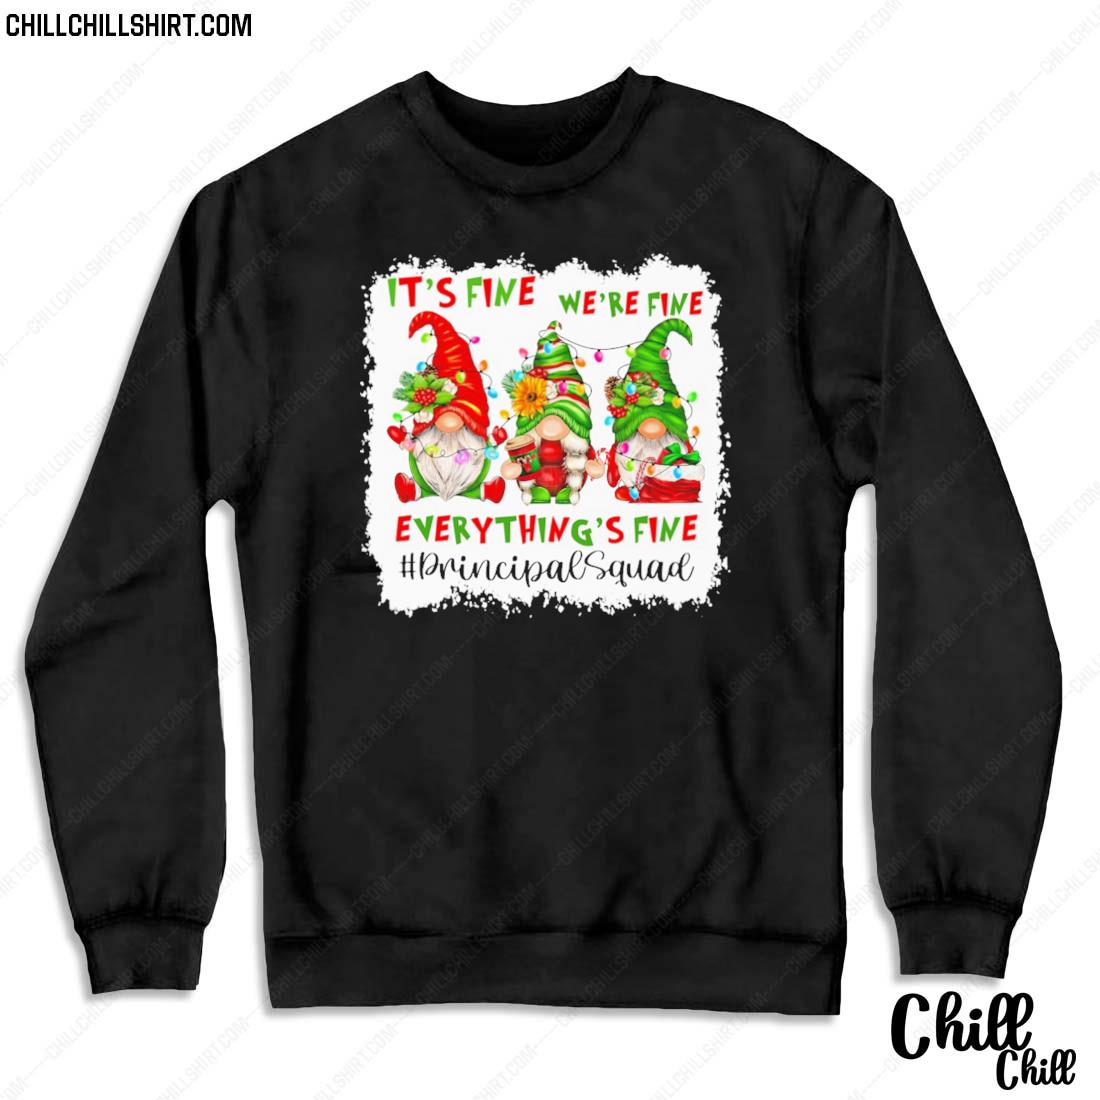 Nice teacher Christmas Gnome Gnomes It’s Fine We’re Fine Everything's Fine Principal Squad Sweater Sweater